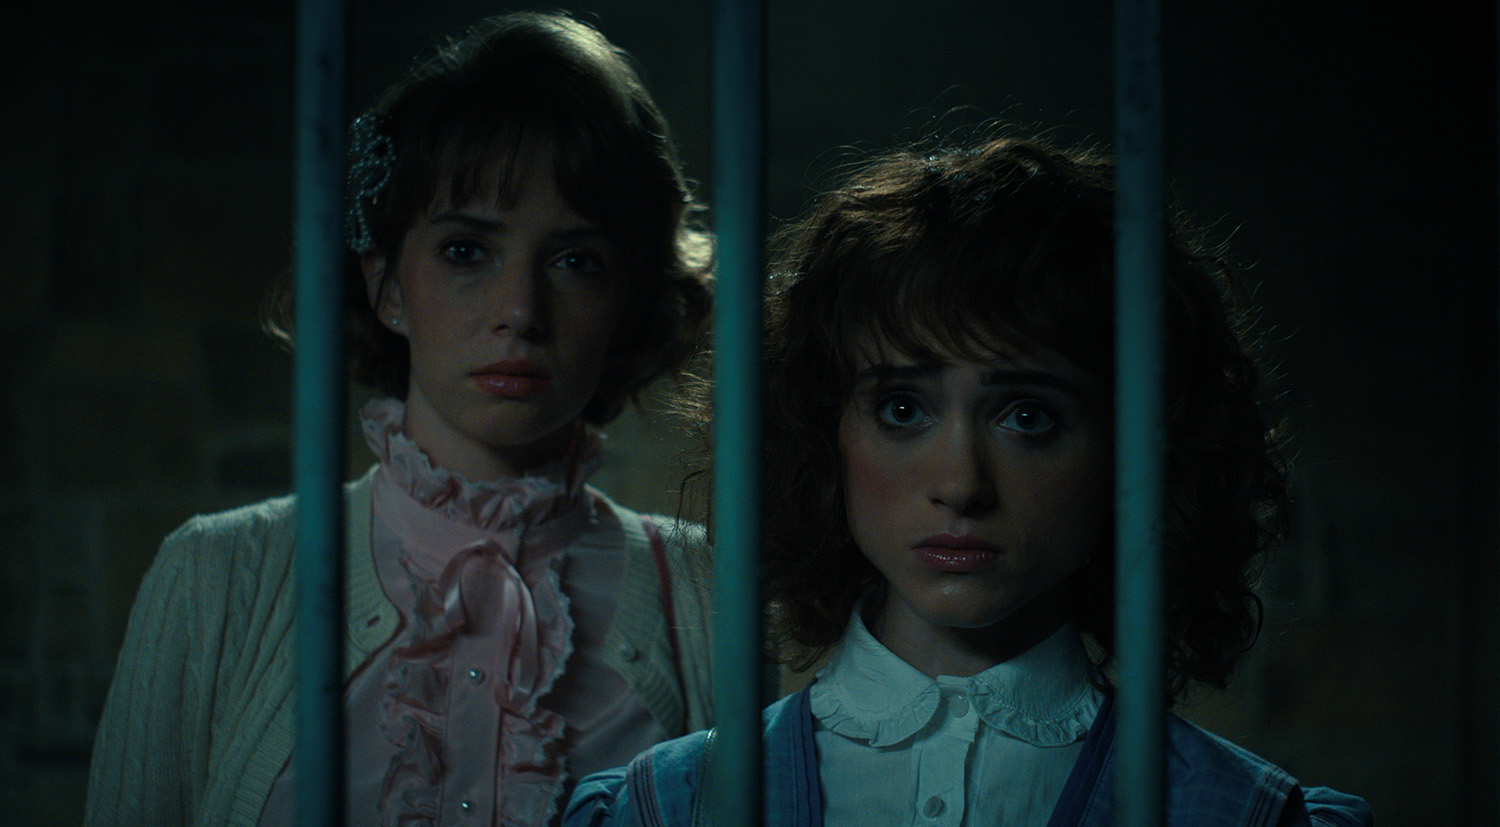 Maya Hawke as Robin Buckley and Natalia Dyer as Nancy Wheeler in Stranger Things 4, which included several horror movie references.